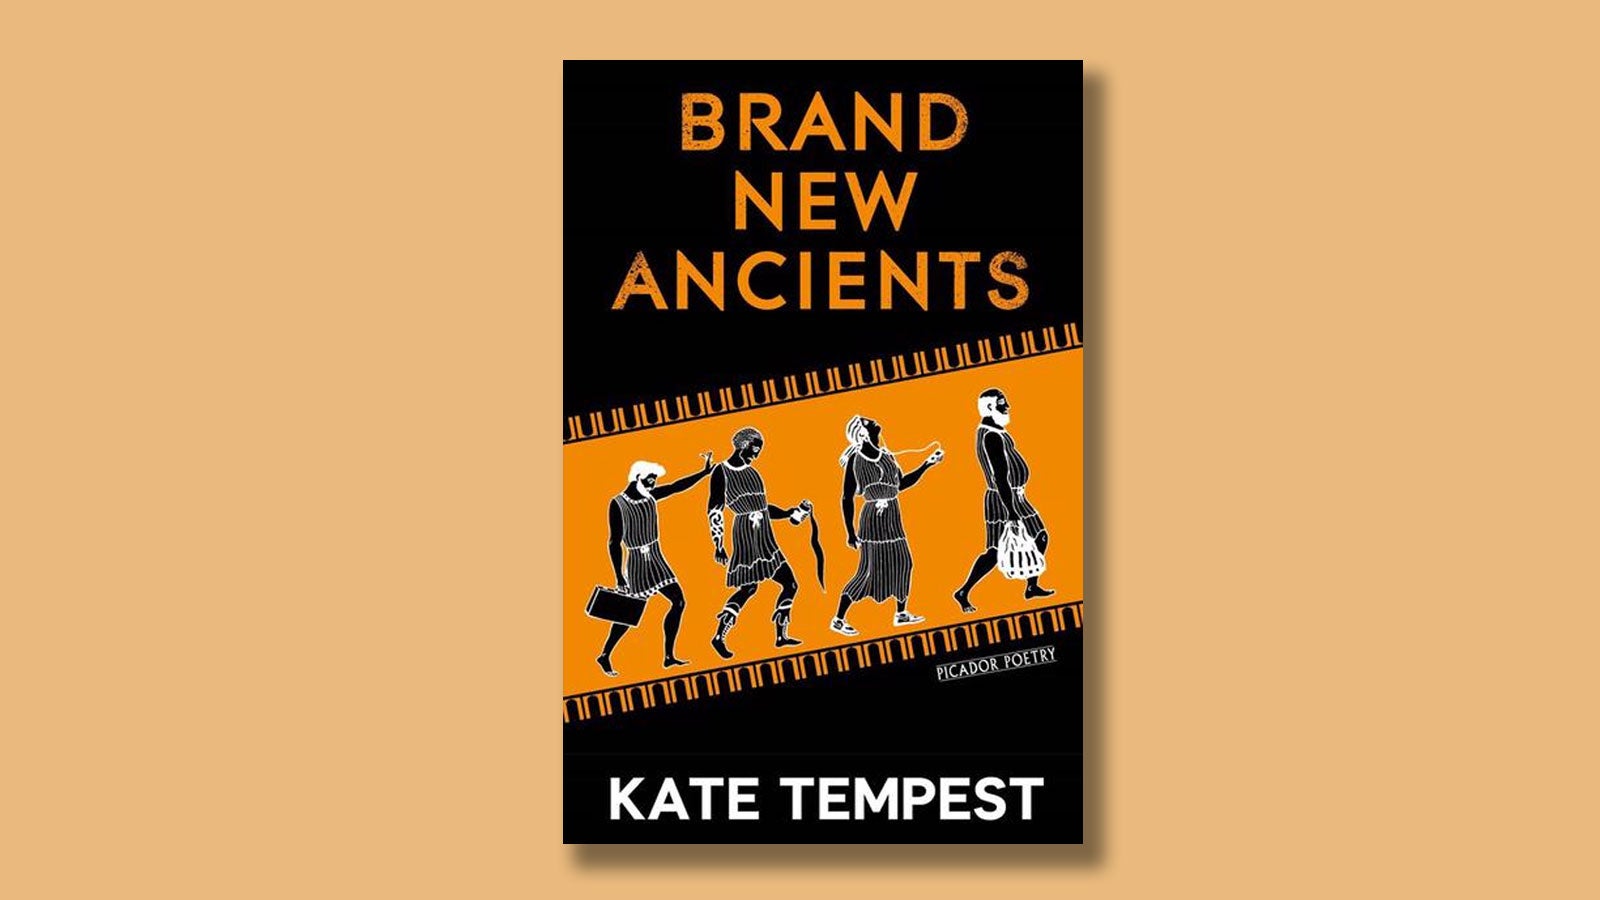 Brand New Ancients by Kae Tempest on a pale orange background.